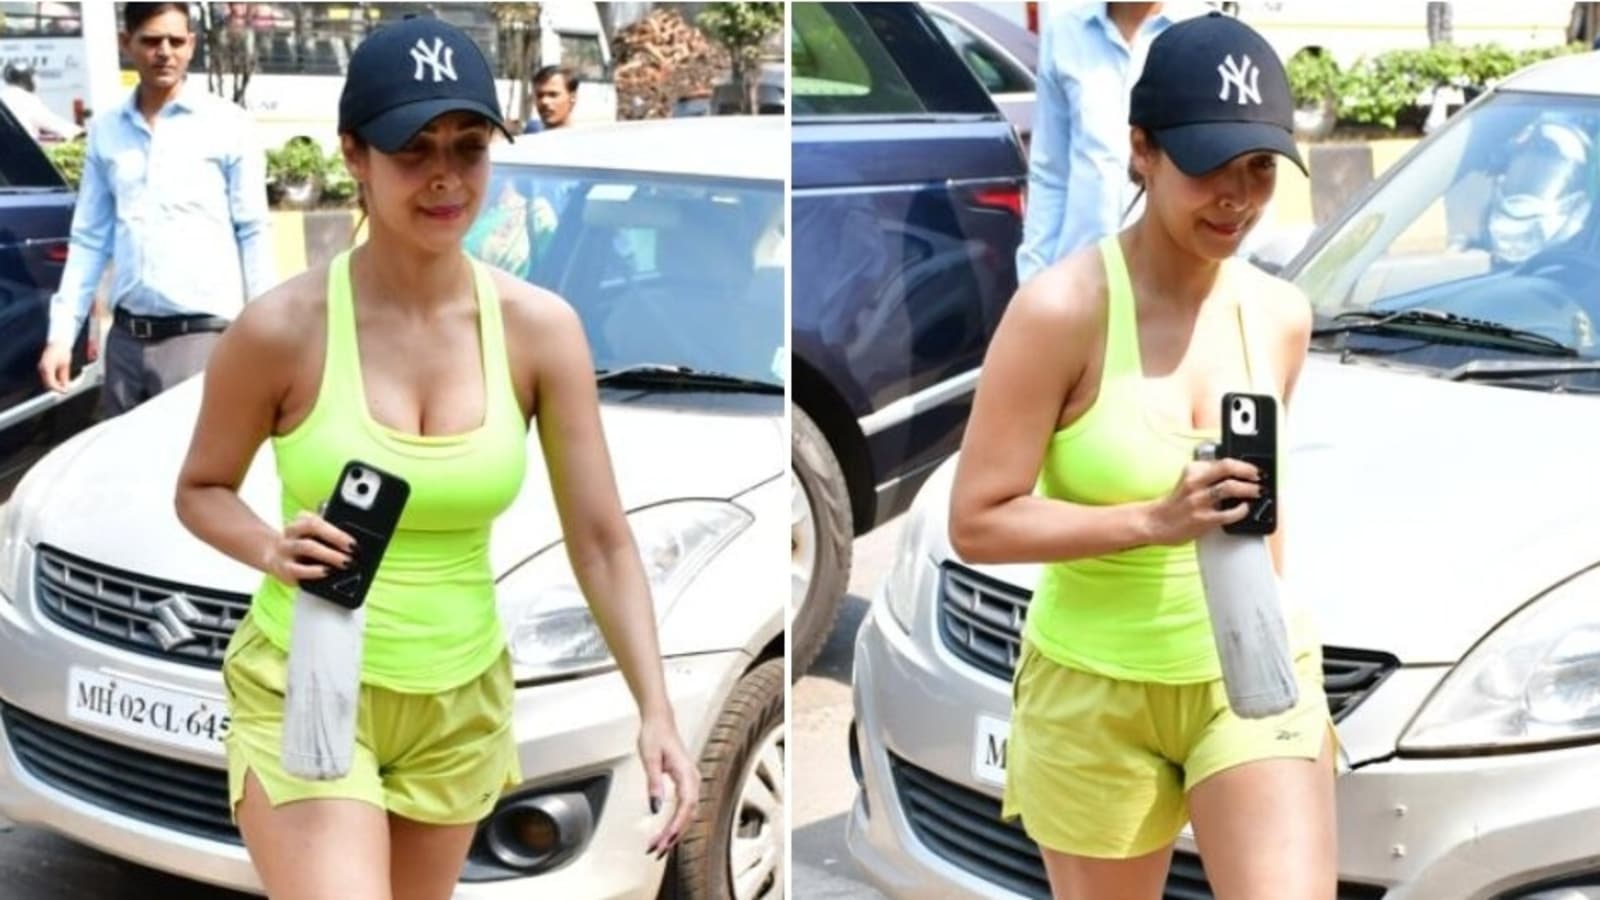 malaika-arora-highlights-her-love-for-neon-as-she-aces-another-gym-look-in-tank-top-and-shorts-see-pics-videos